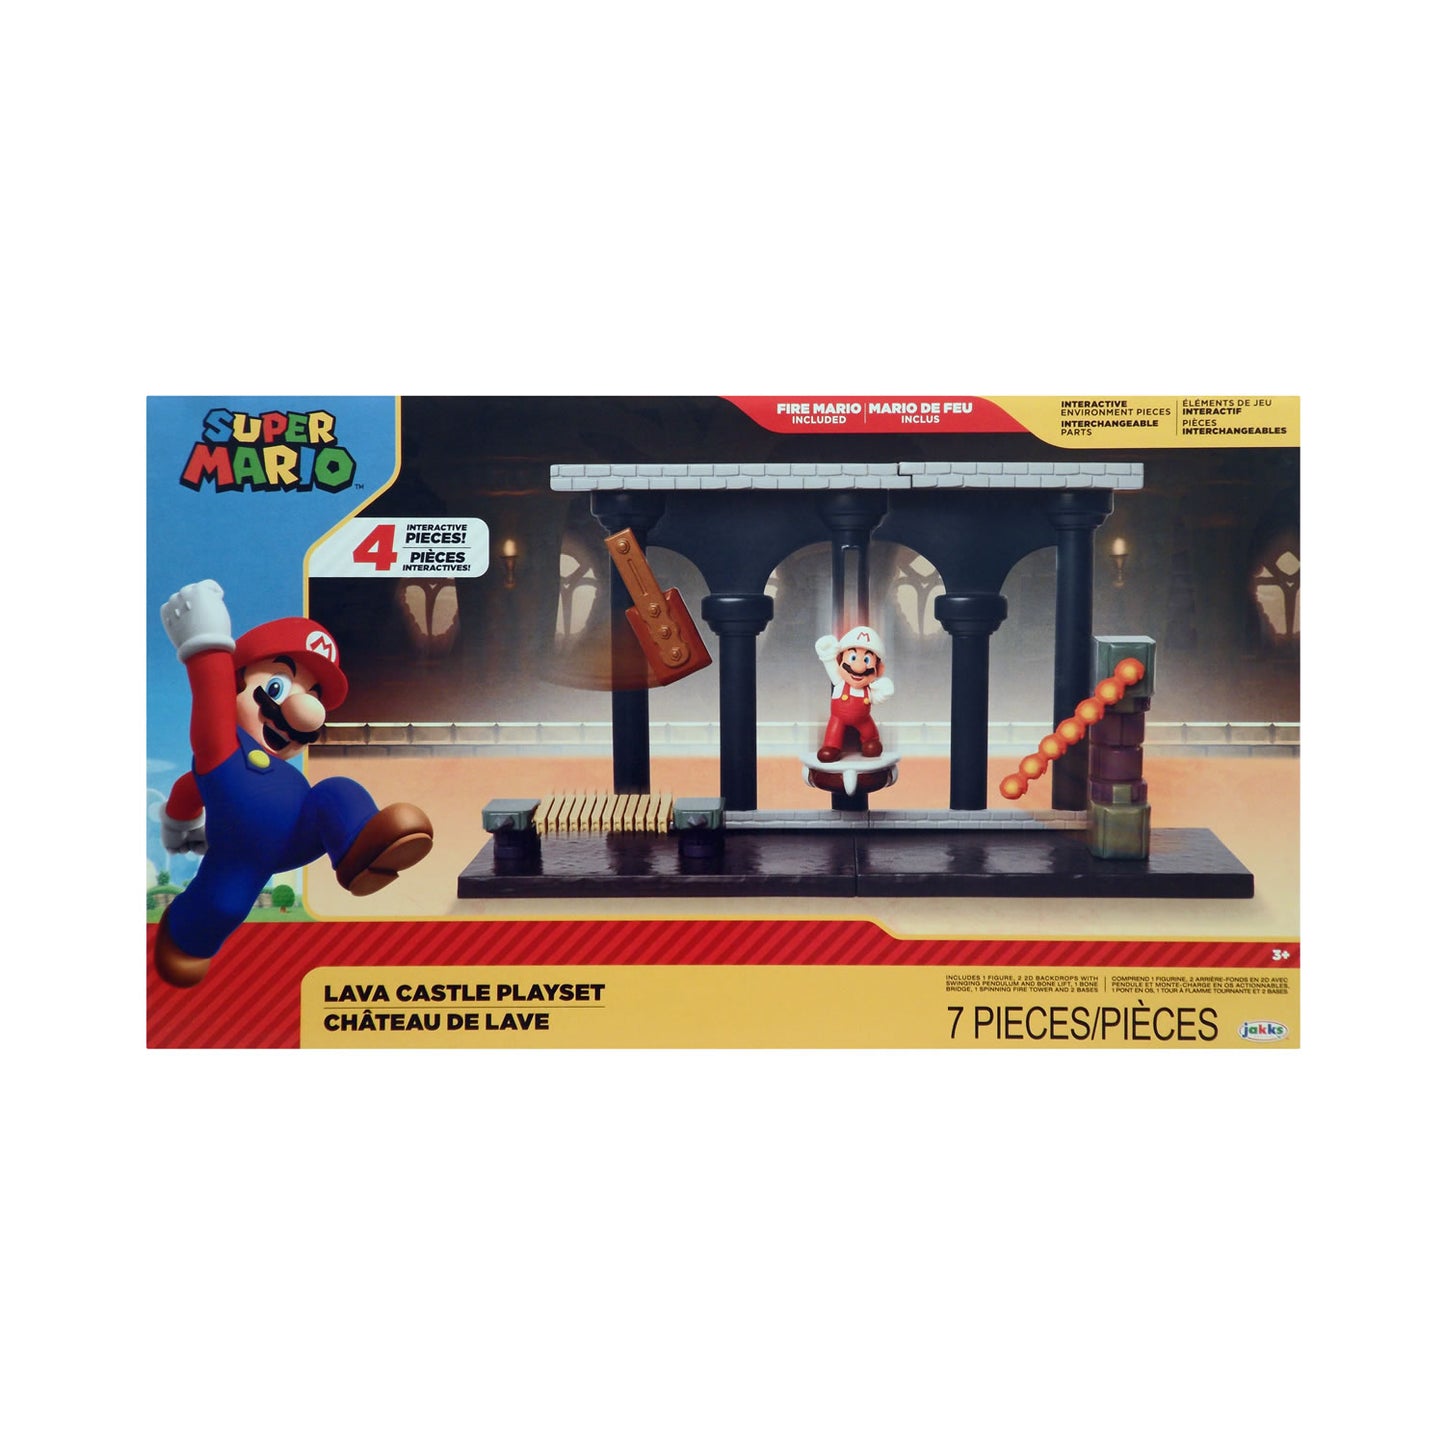 Lava Castle Playset from Super Mario